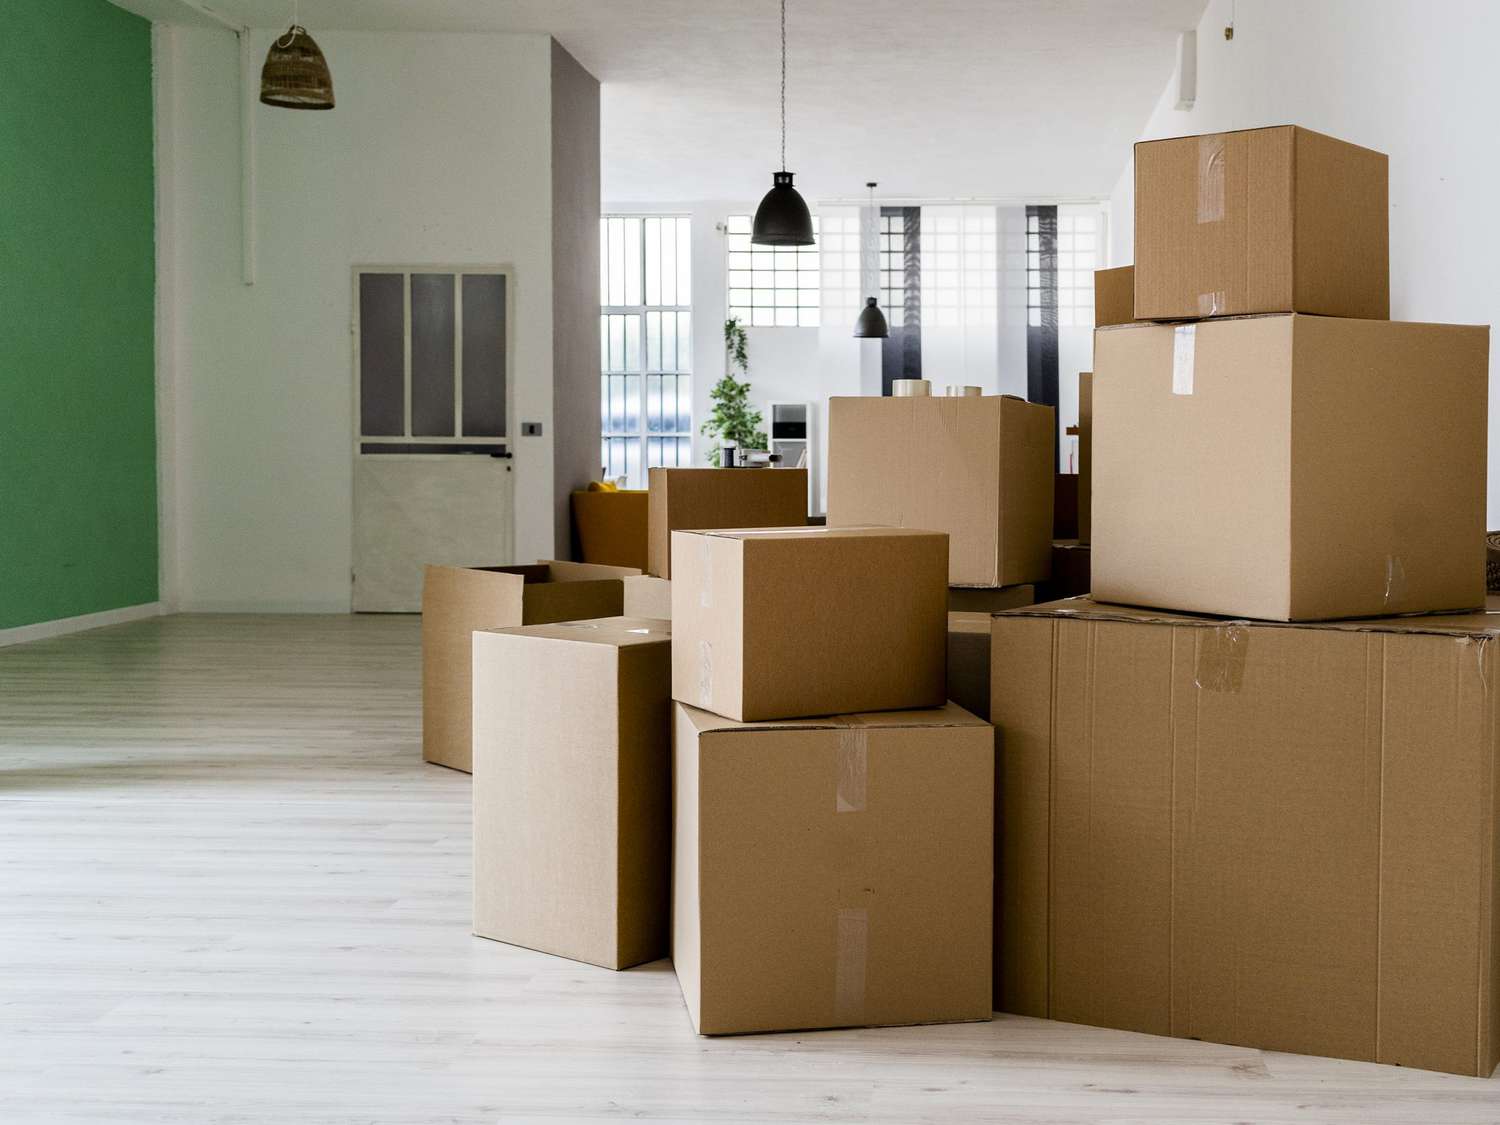 Tips for Moving to a Smaller Space Without Stress